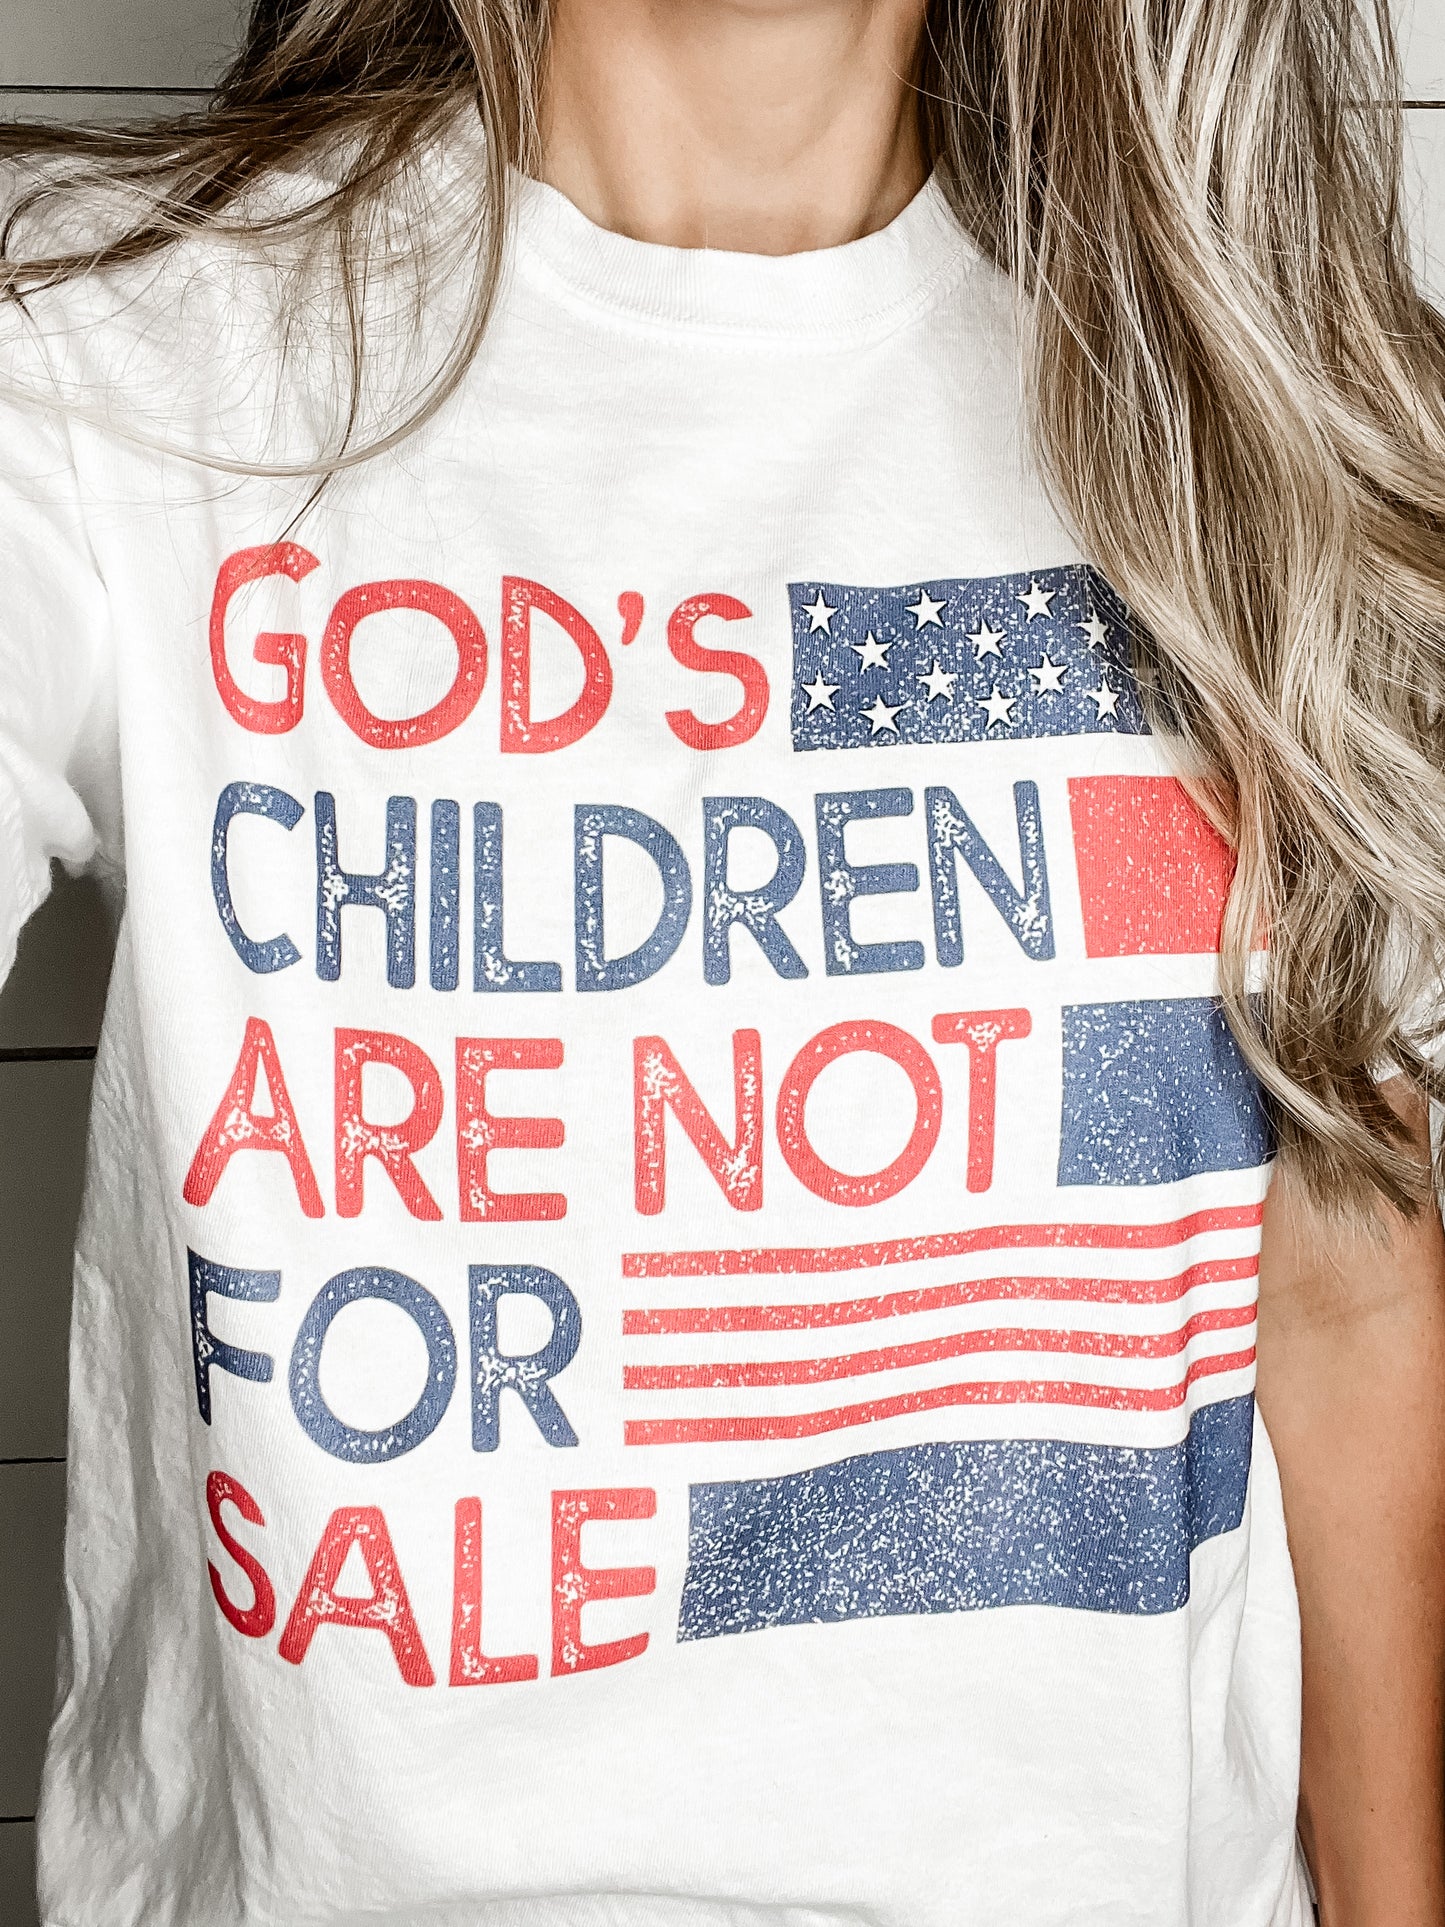 God’s Children are NOT for sale